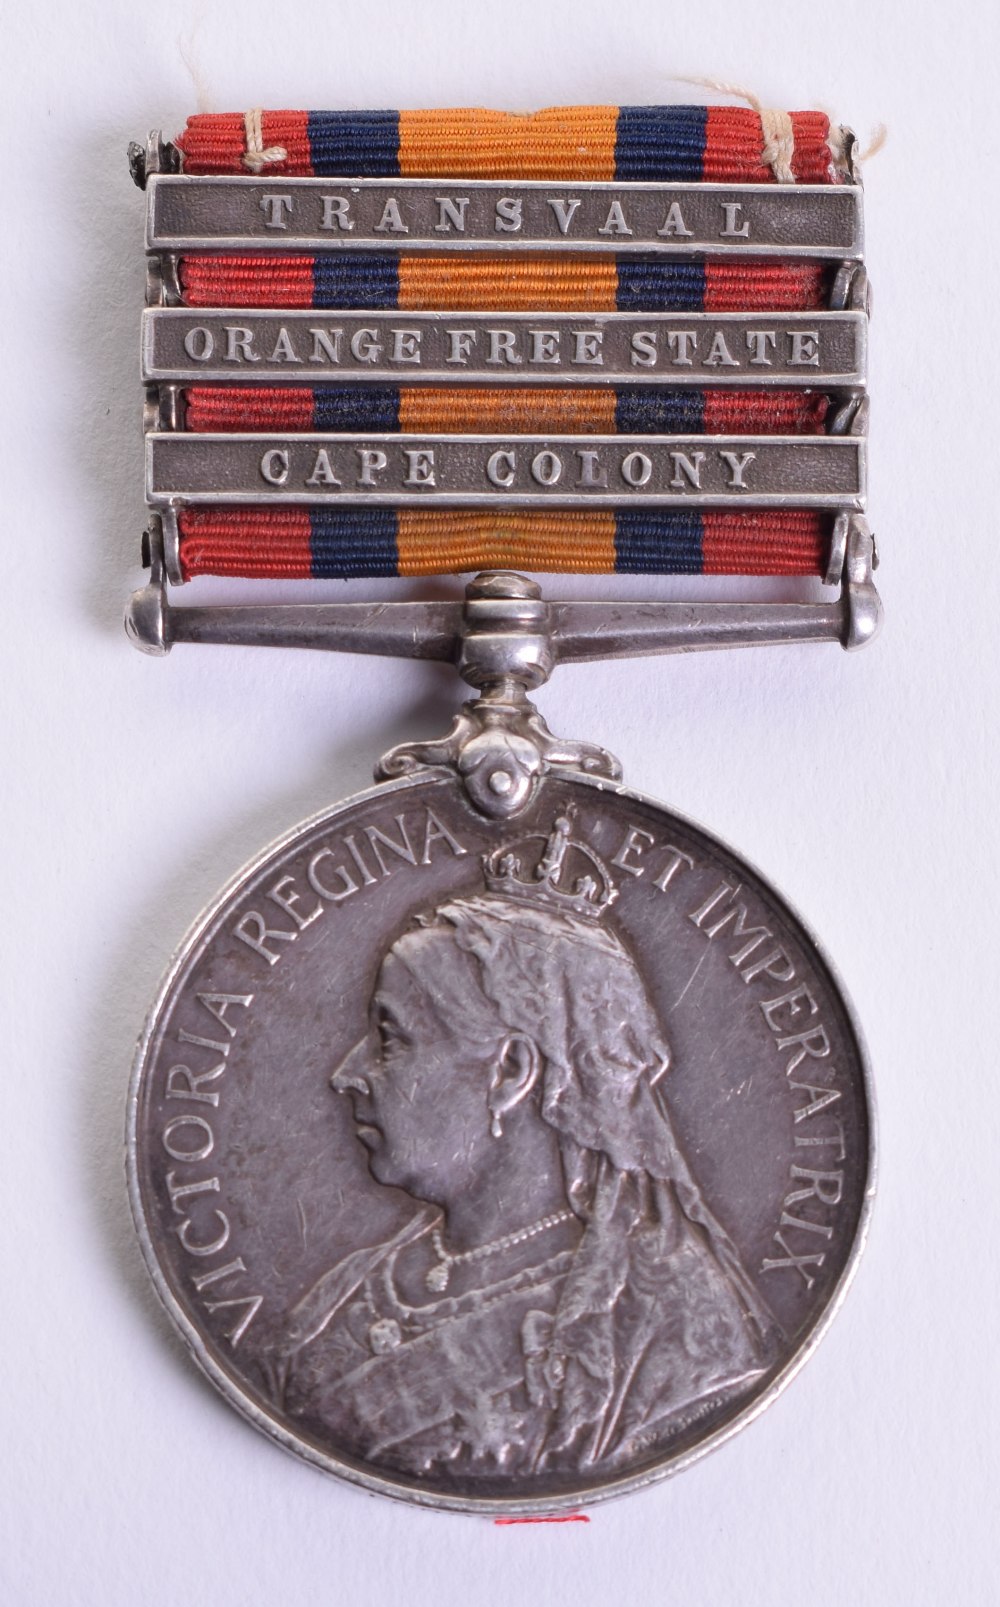 Queens South Africa Medal 1899-1902 Three Clasps, Seaforth Highlanders Mounted Infantry, medal has